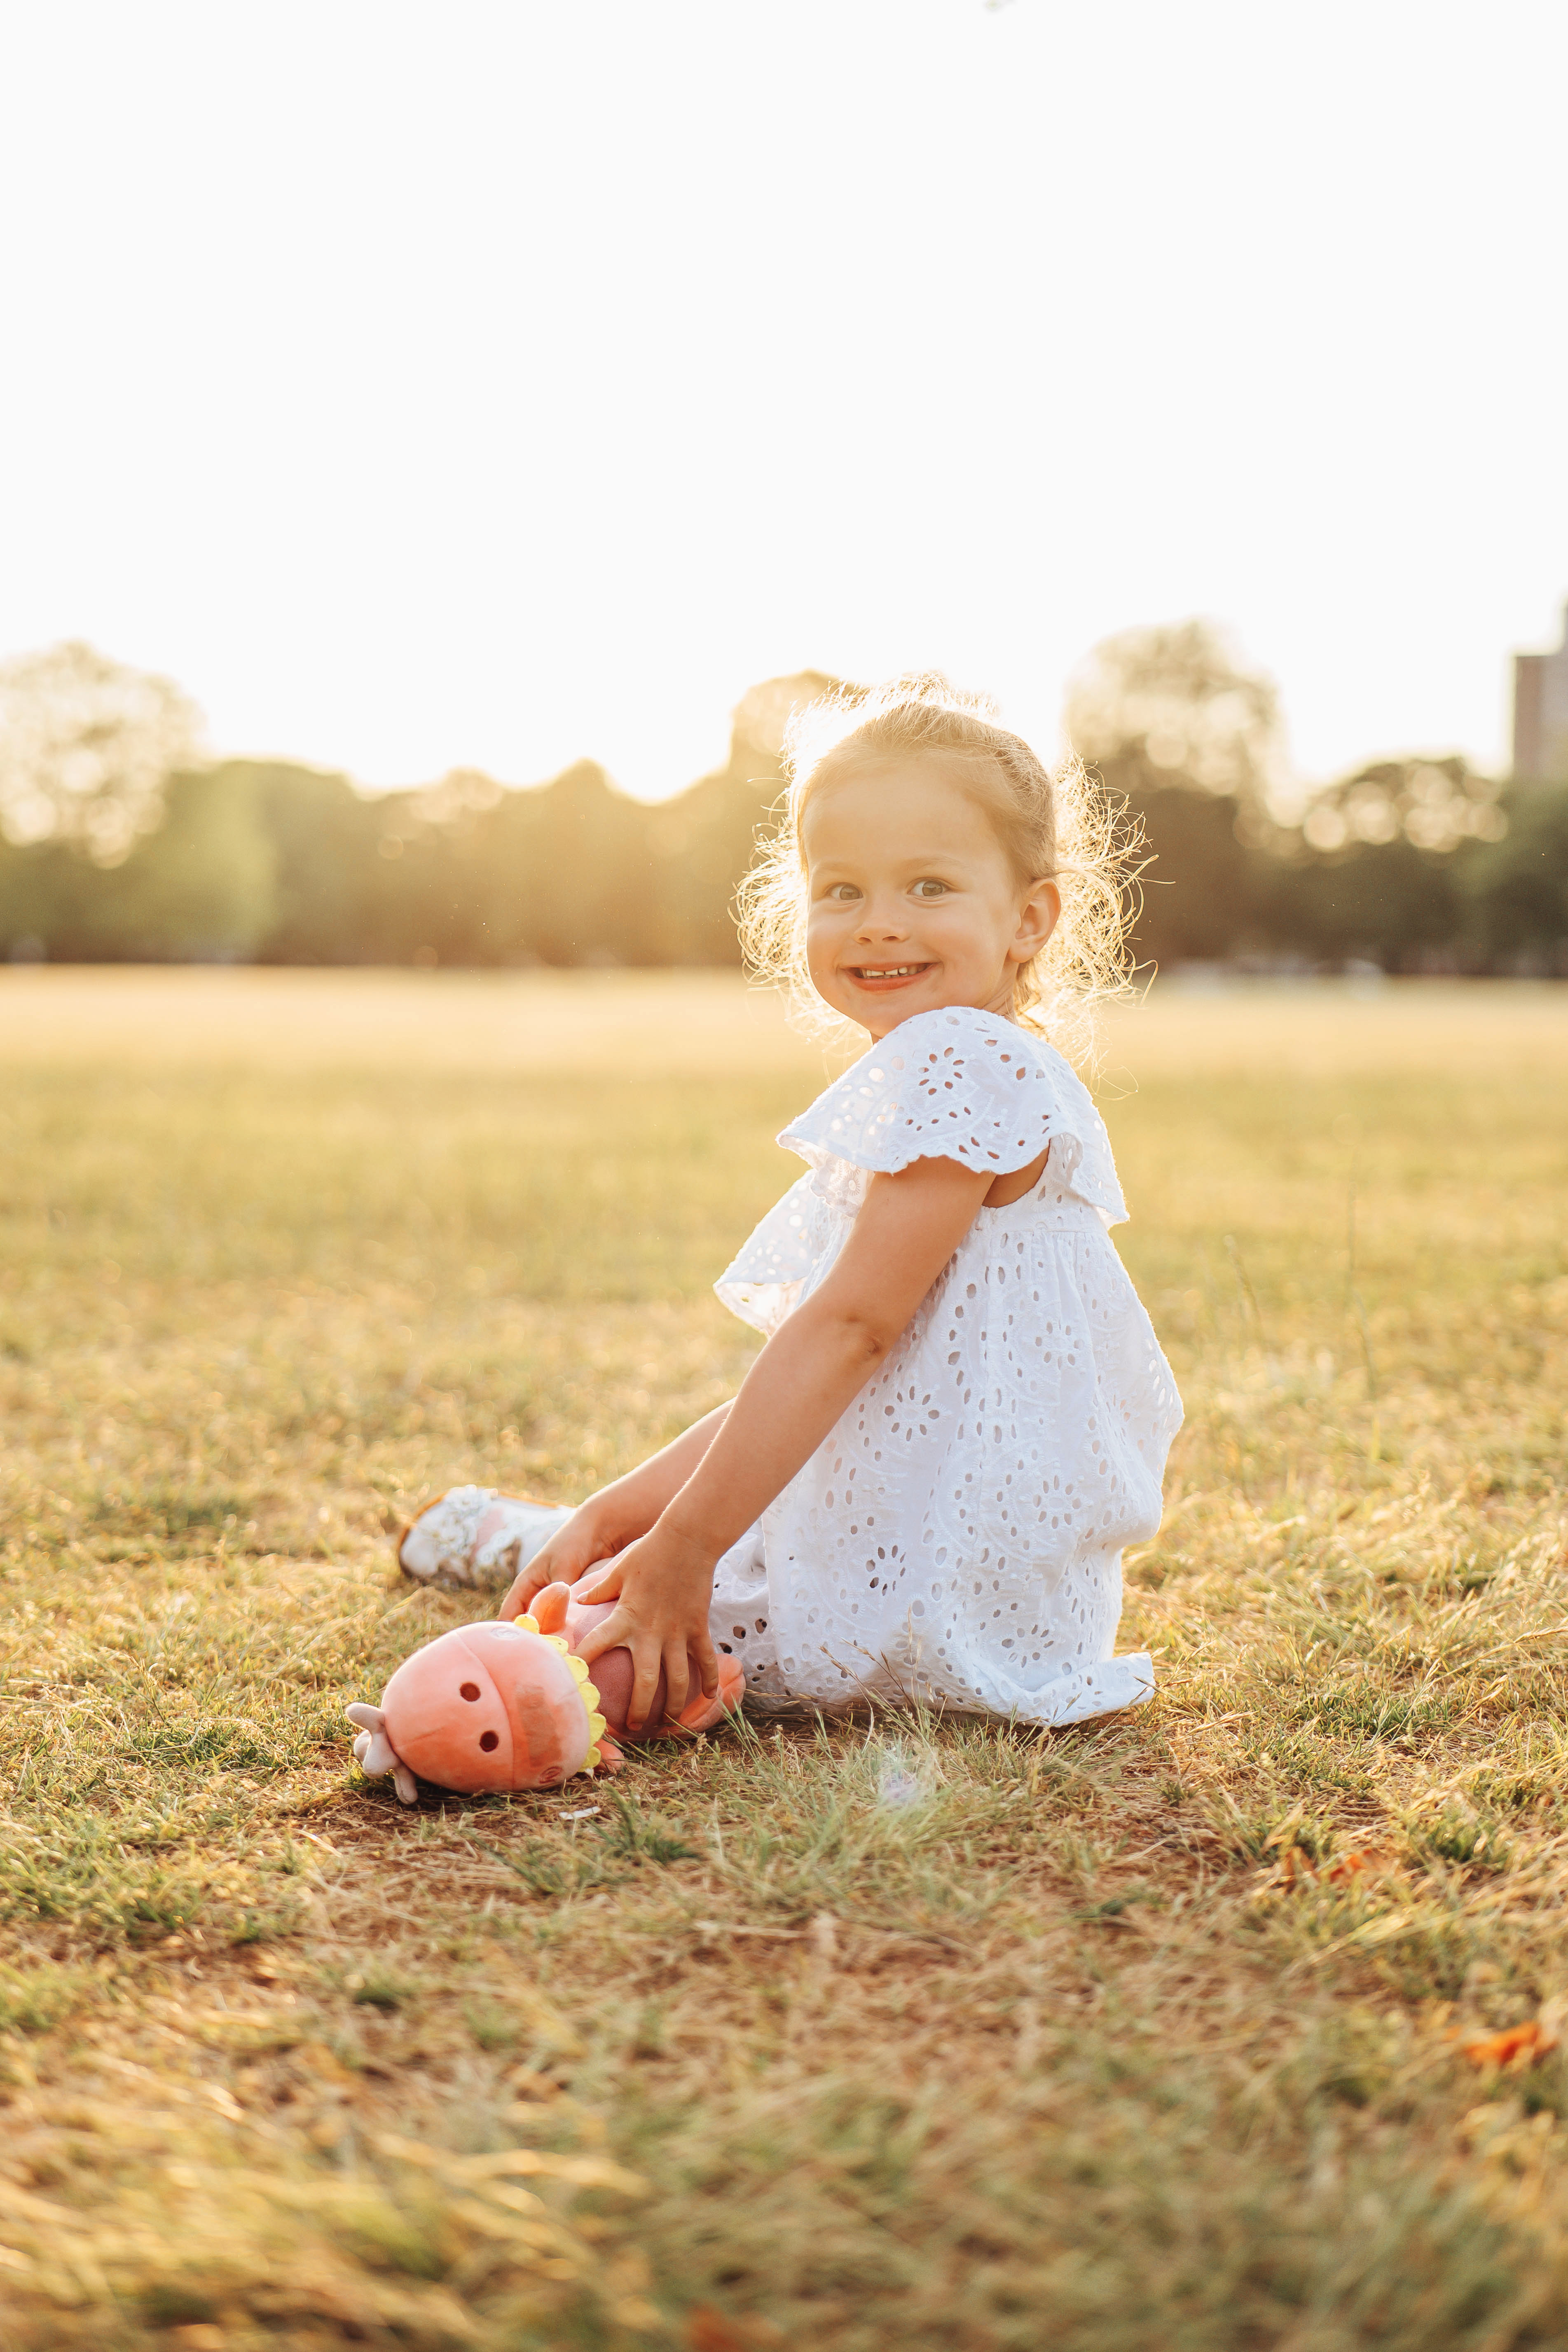 Small girl in the grass smiling, sunset